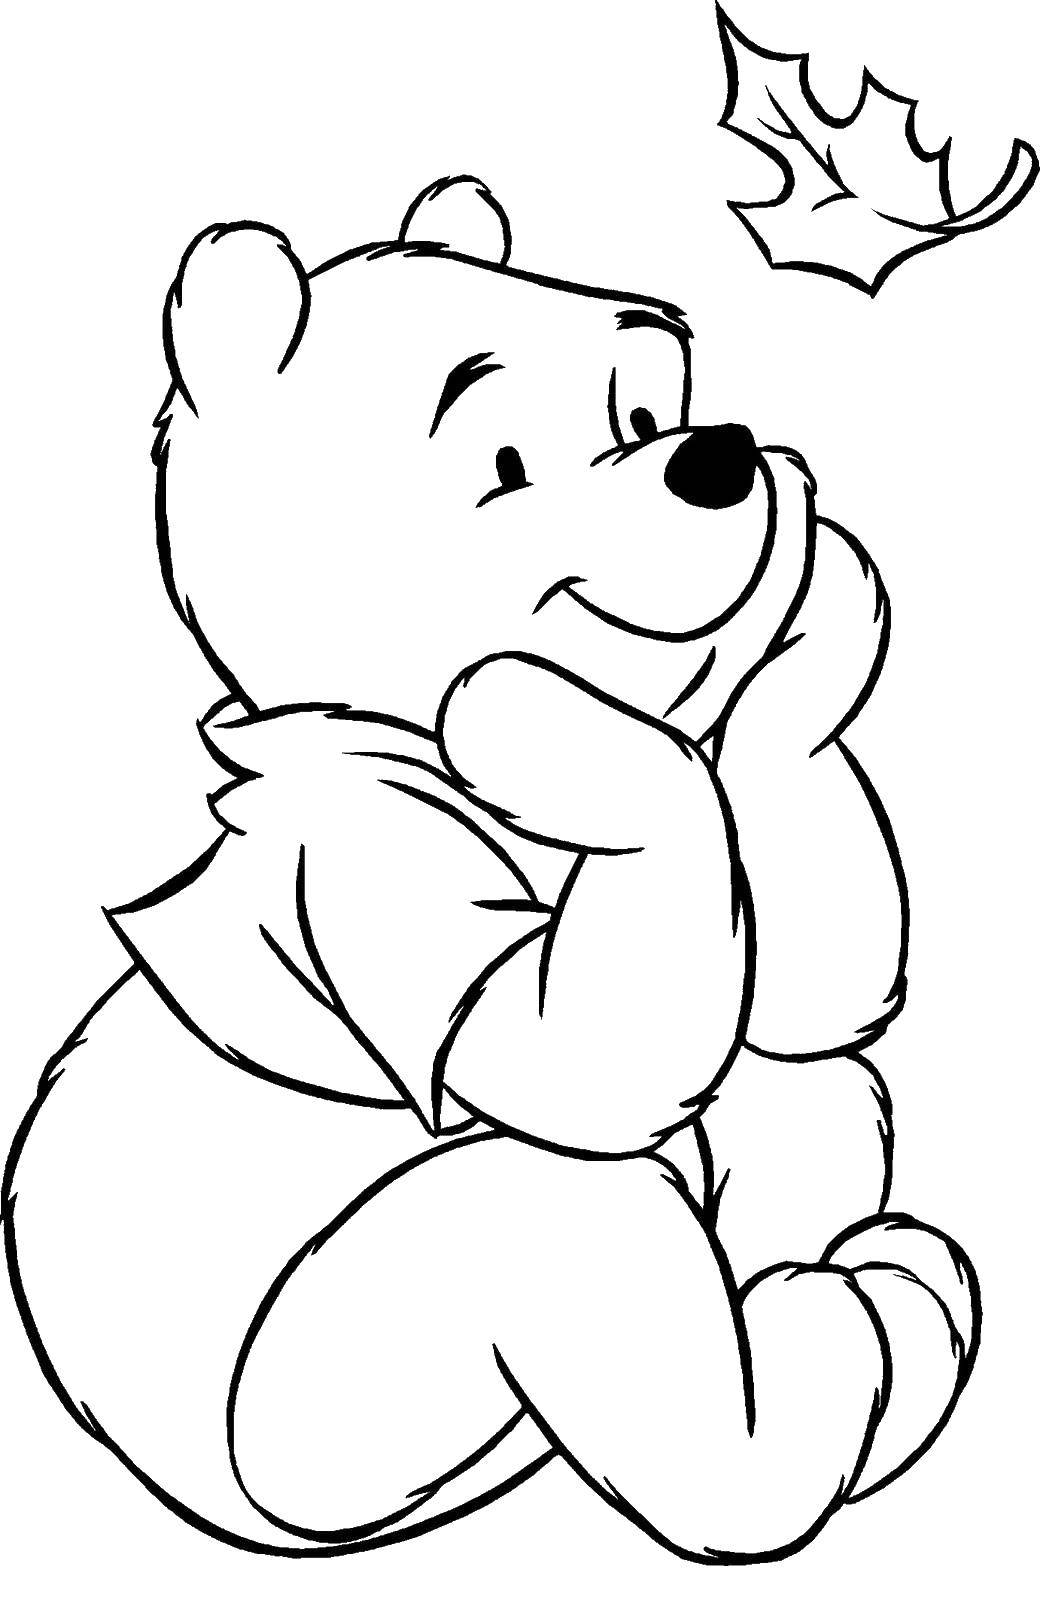 Coloring Winnie the Pooh. Category Disney coloring pages. Tags:  Cartoon character, Winnie the Pooh.